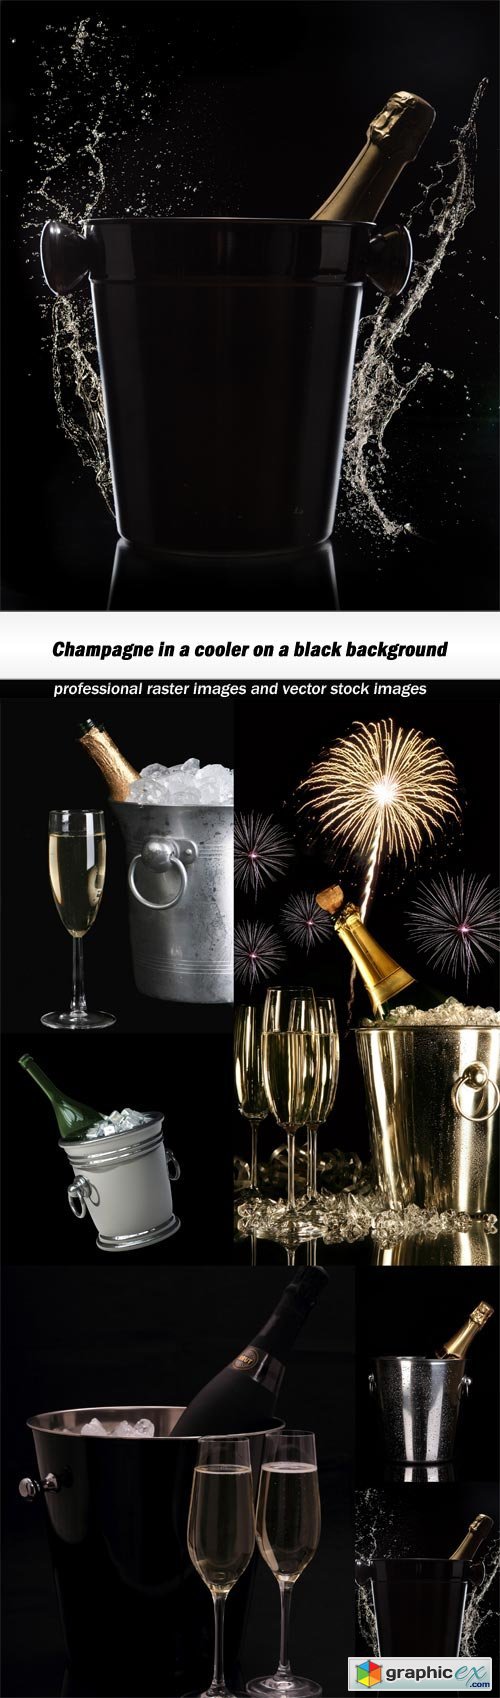 Champagne in a cooler on a black background